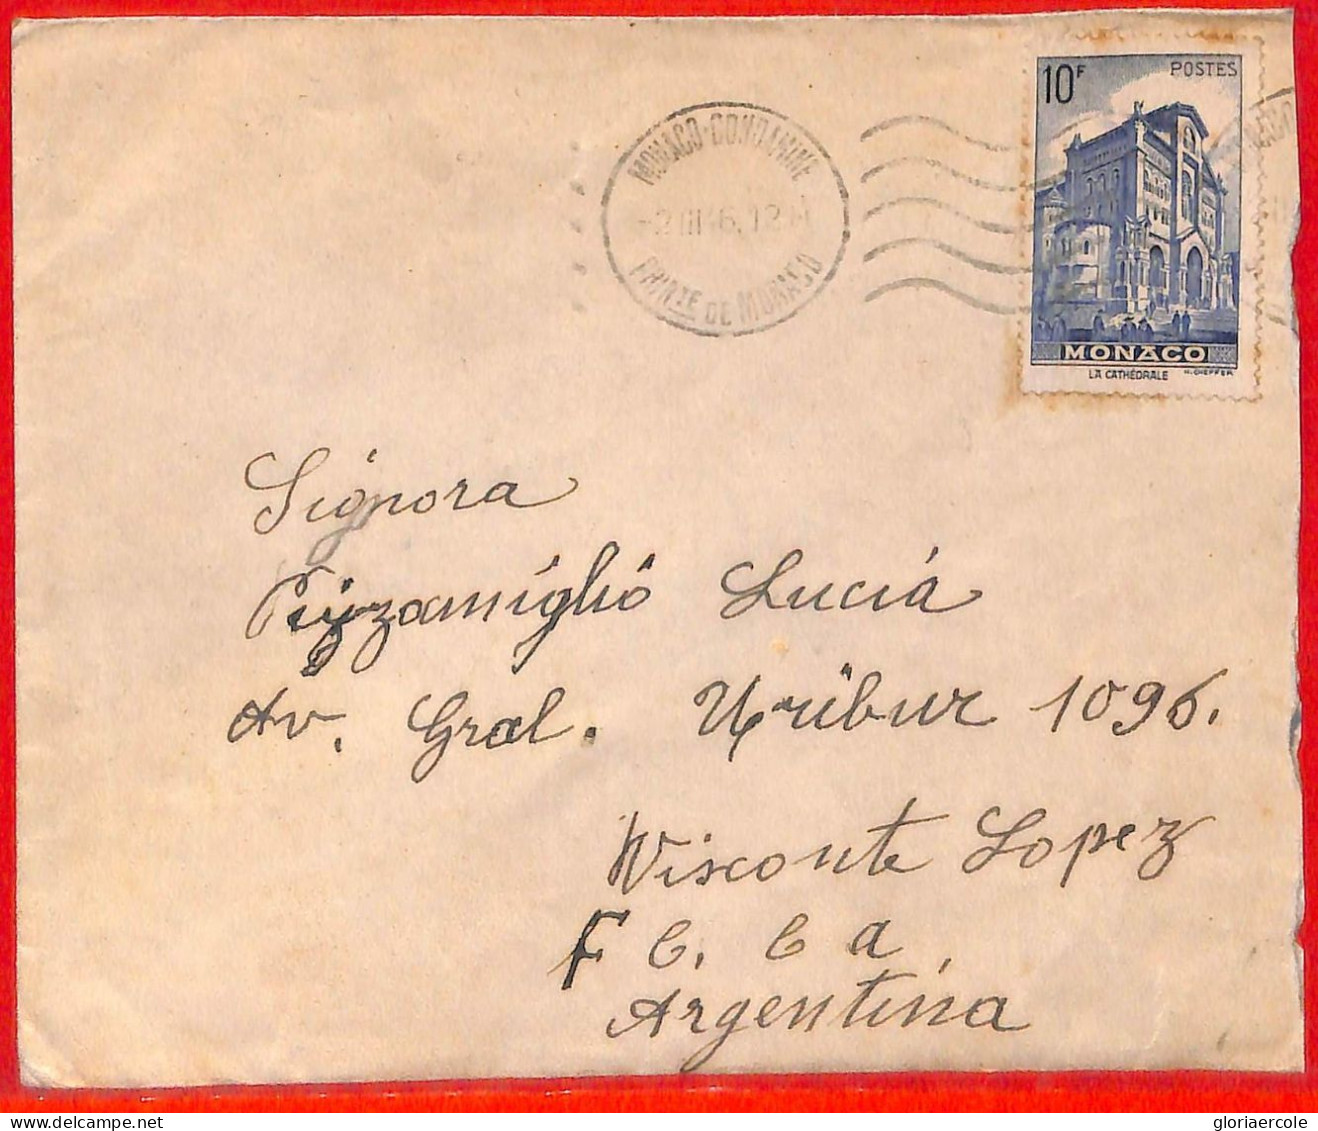 Aa0991 - MONACO - Postal History -  COVER To ARGENTINA 1946 - Covers & Documents